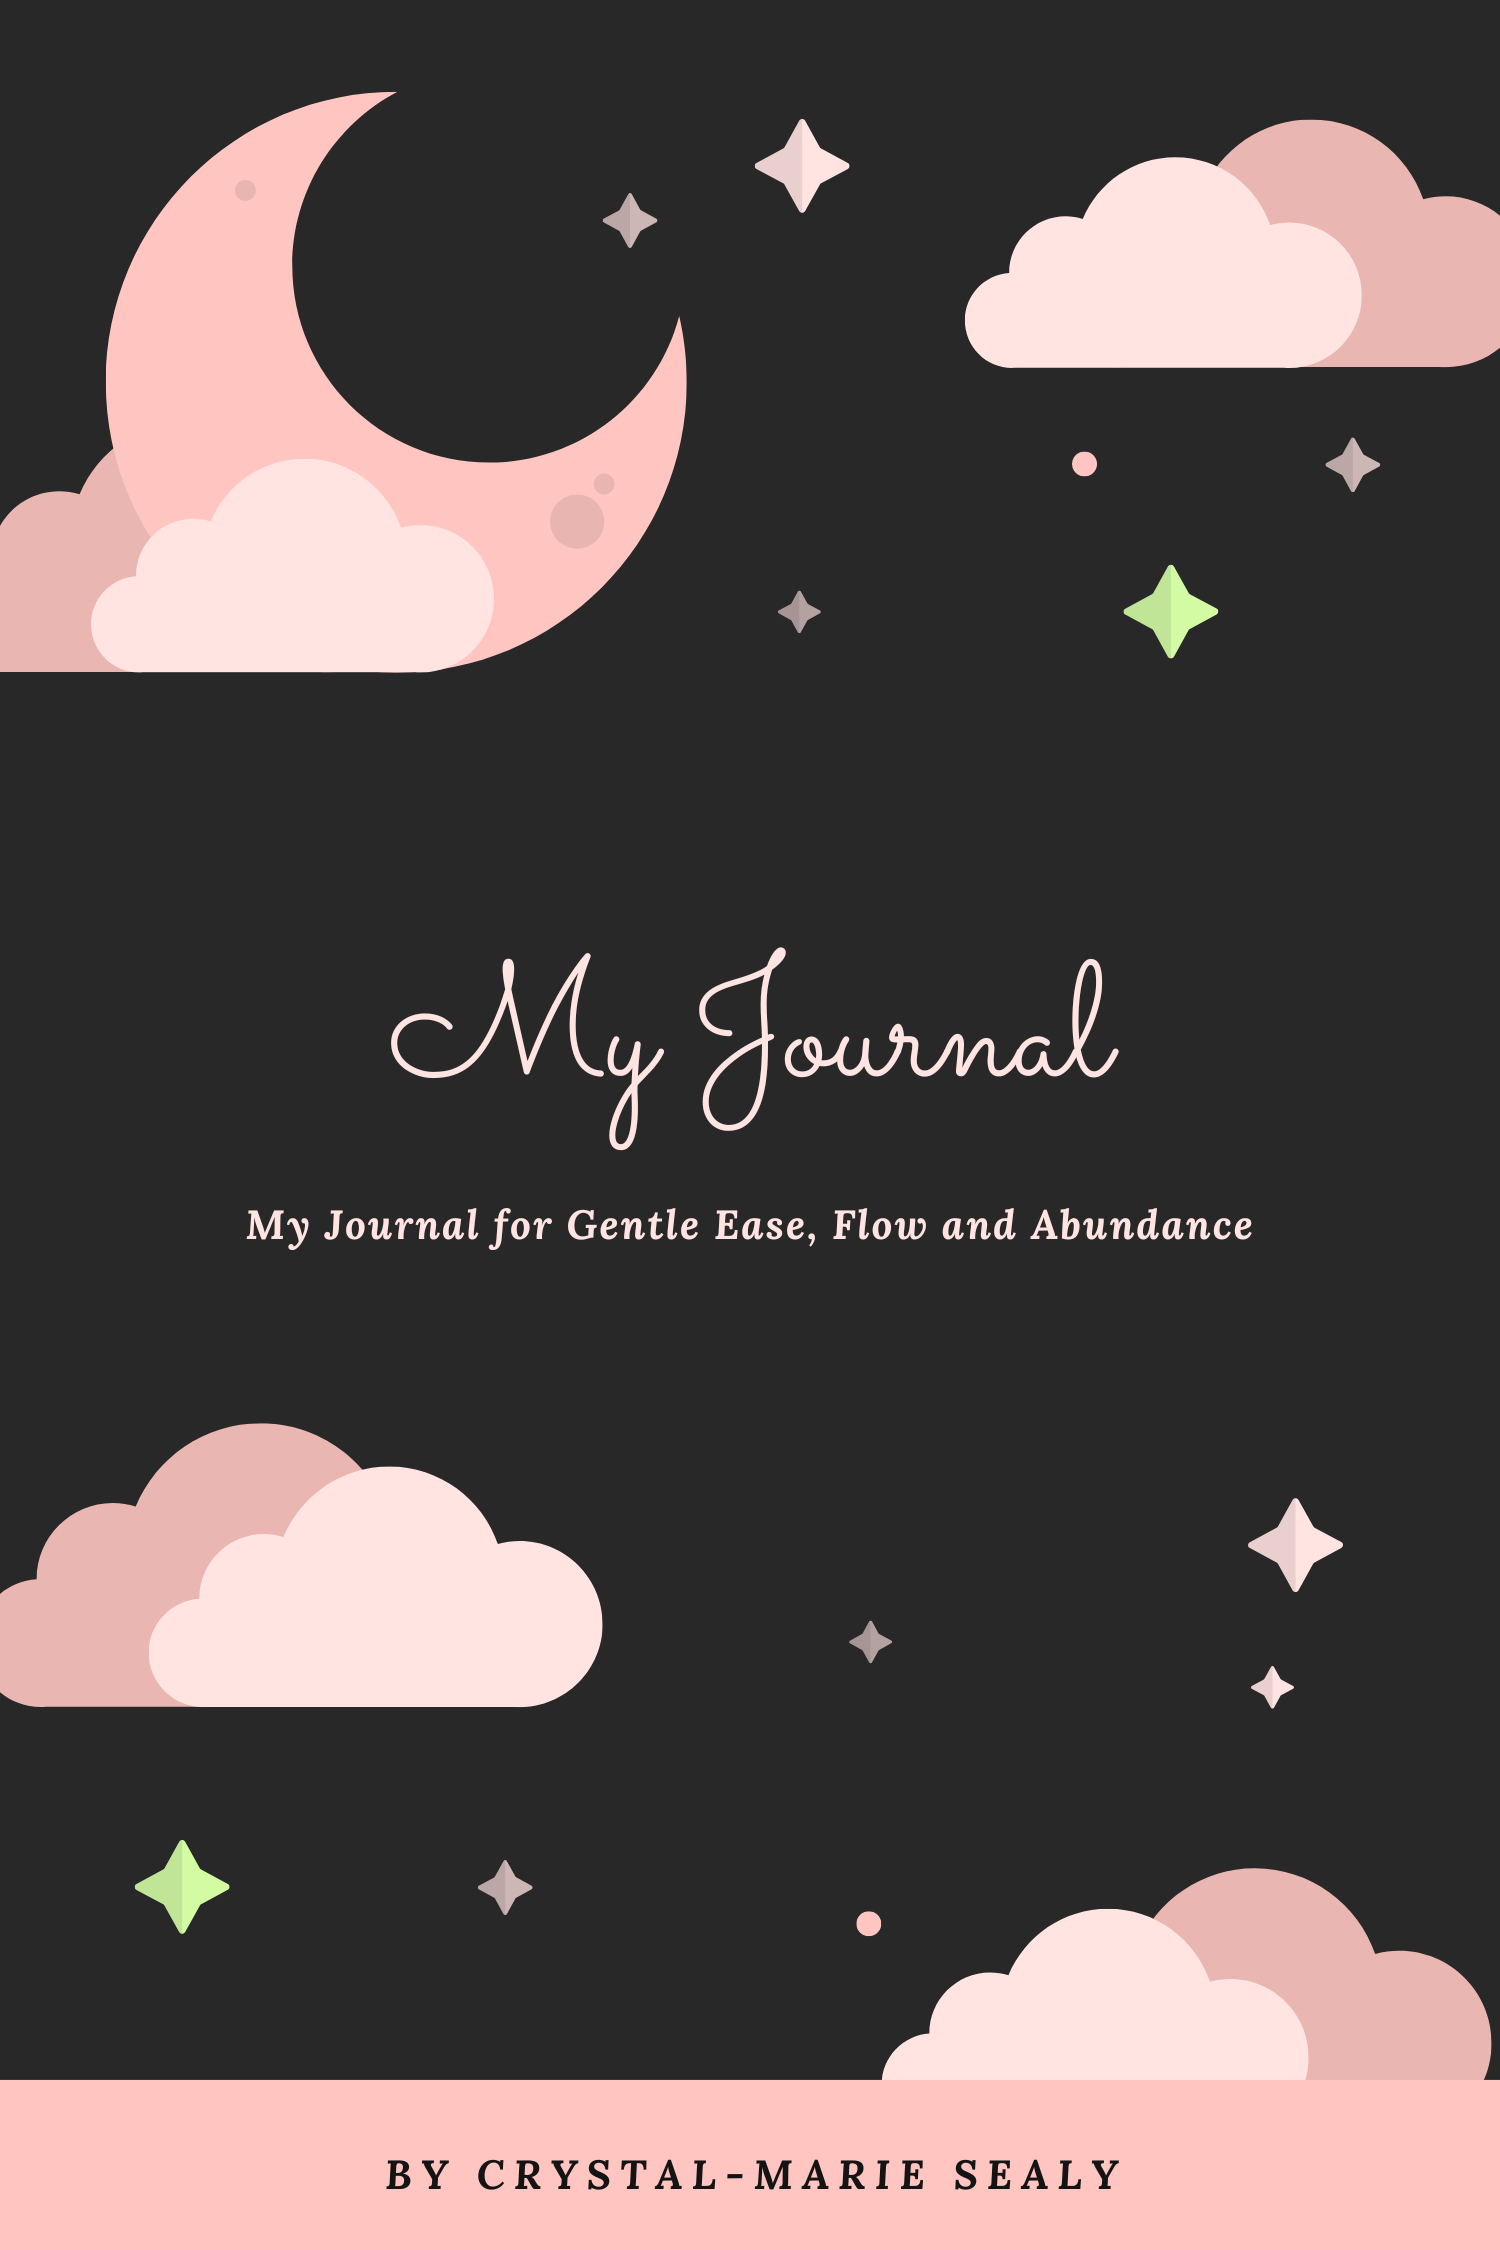 My Journal for Gentle Ease, Flow and Abundance (Moon)